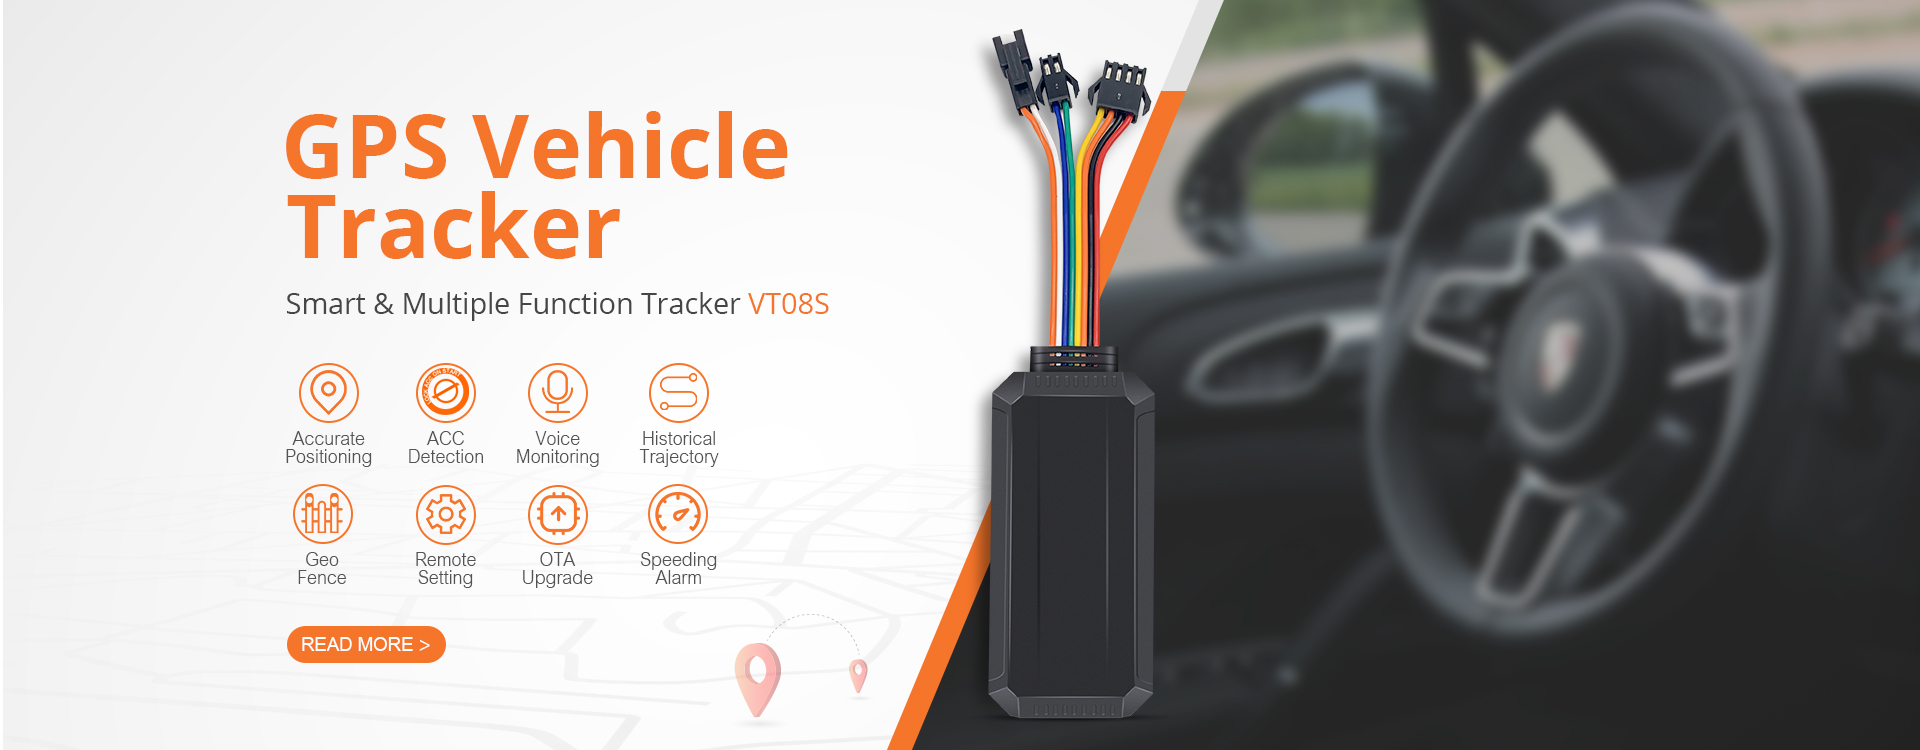 vehicle tracker manufacturers